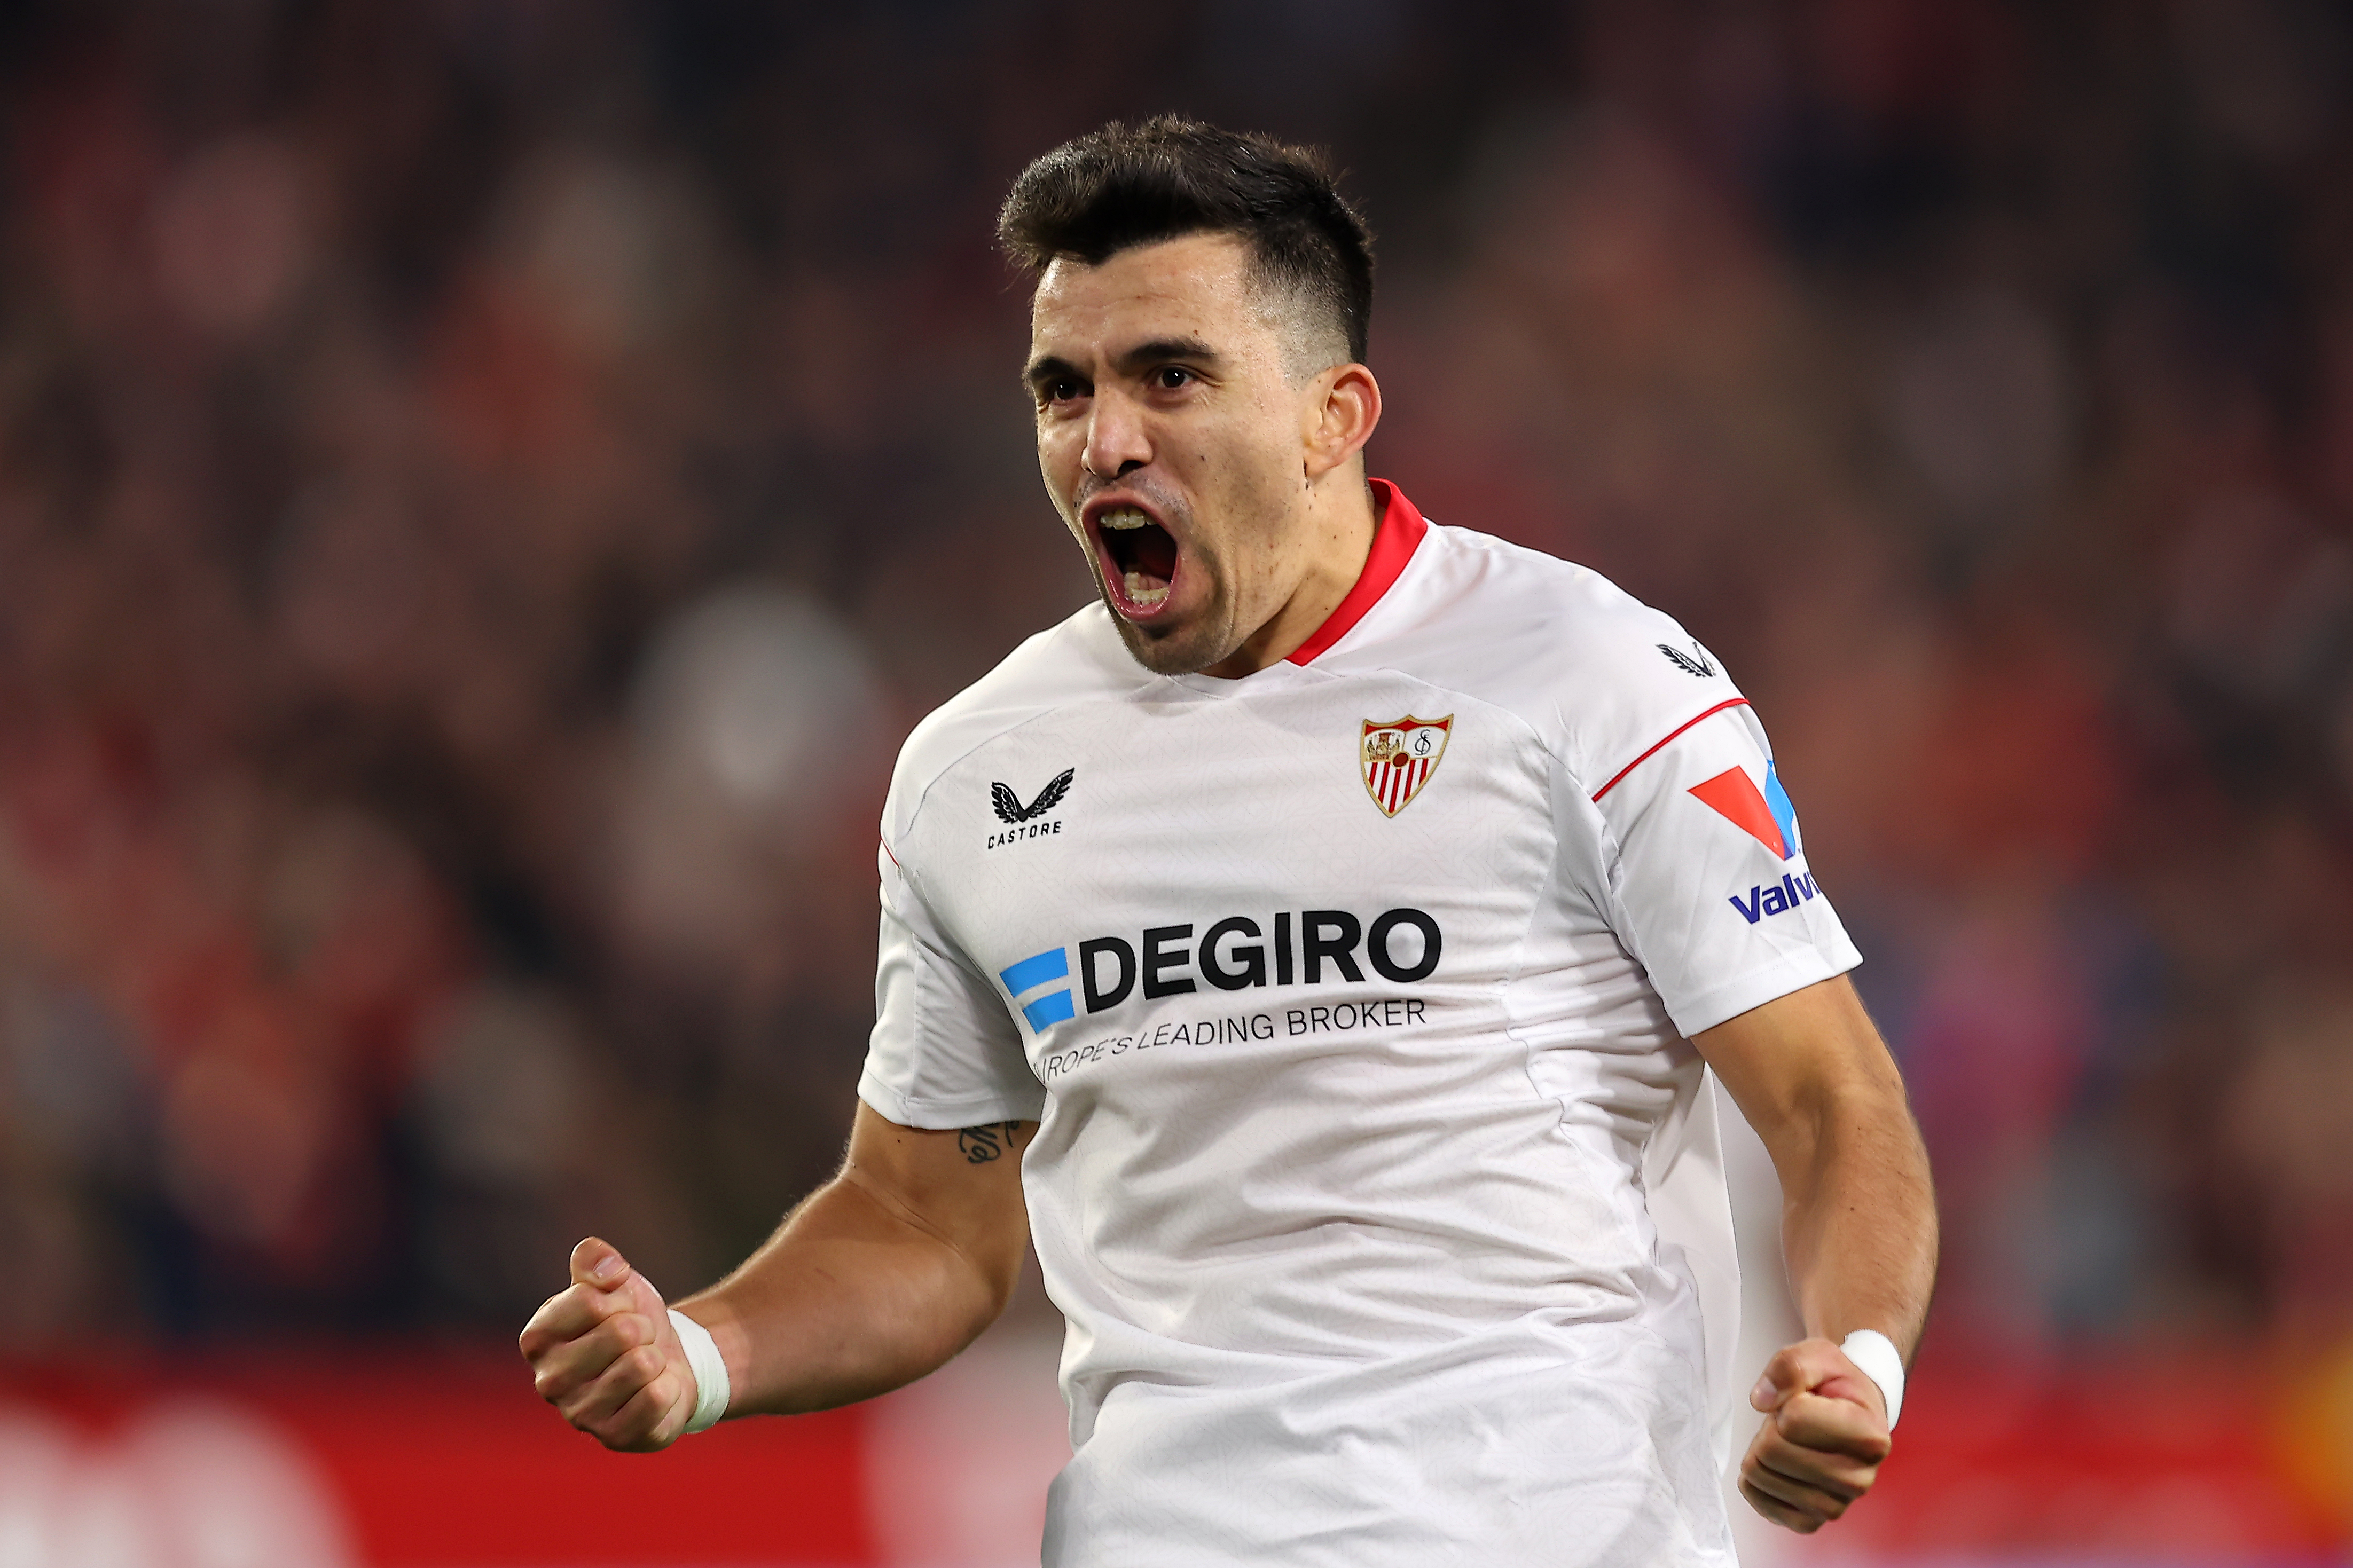 SEVILLE, SPAIN - JANUARY 28: Marcos Acuna of Sevilla FC celebrates after scoring the team's second goal during the LaLiga Santander match between Sevilla FC and Elche CF at Estadio Ramon Sanchez Pizjuan on January 28, 2023 in Seville, Spain. (Photo by Fran Santiago/Getty Images)